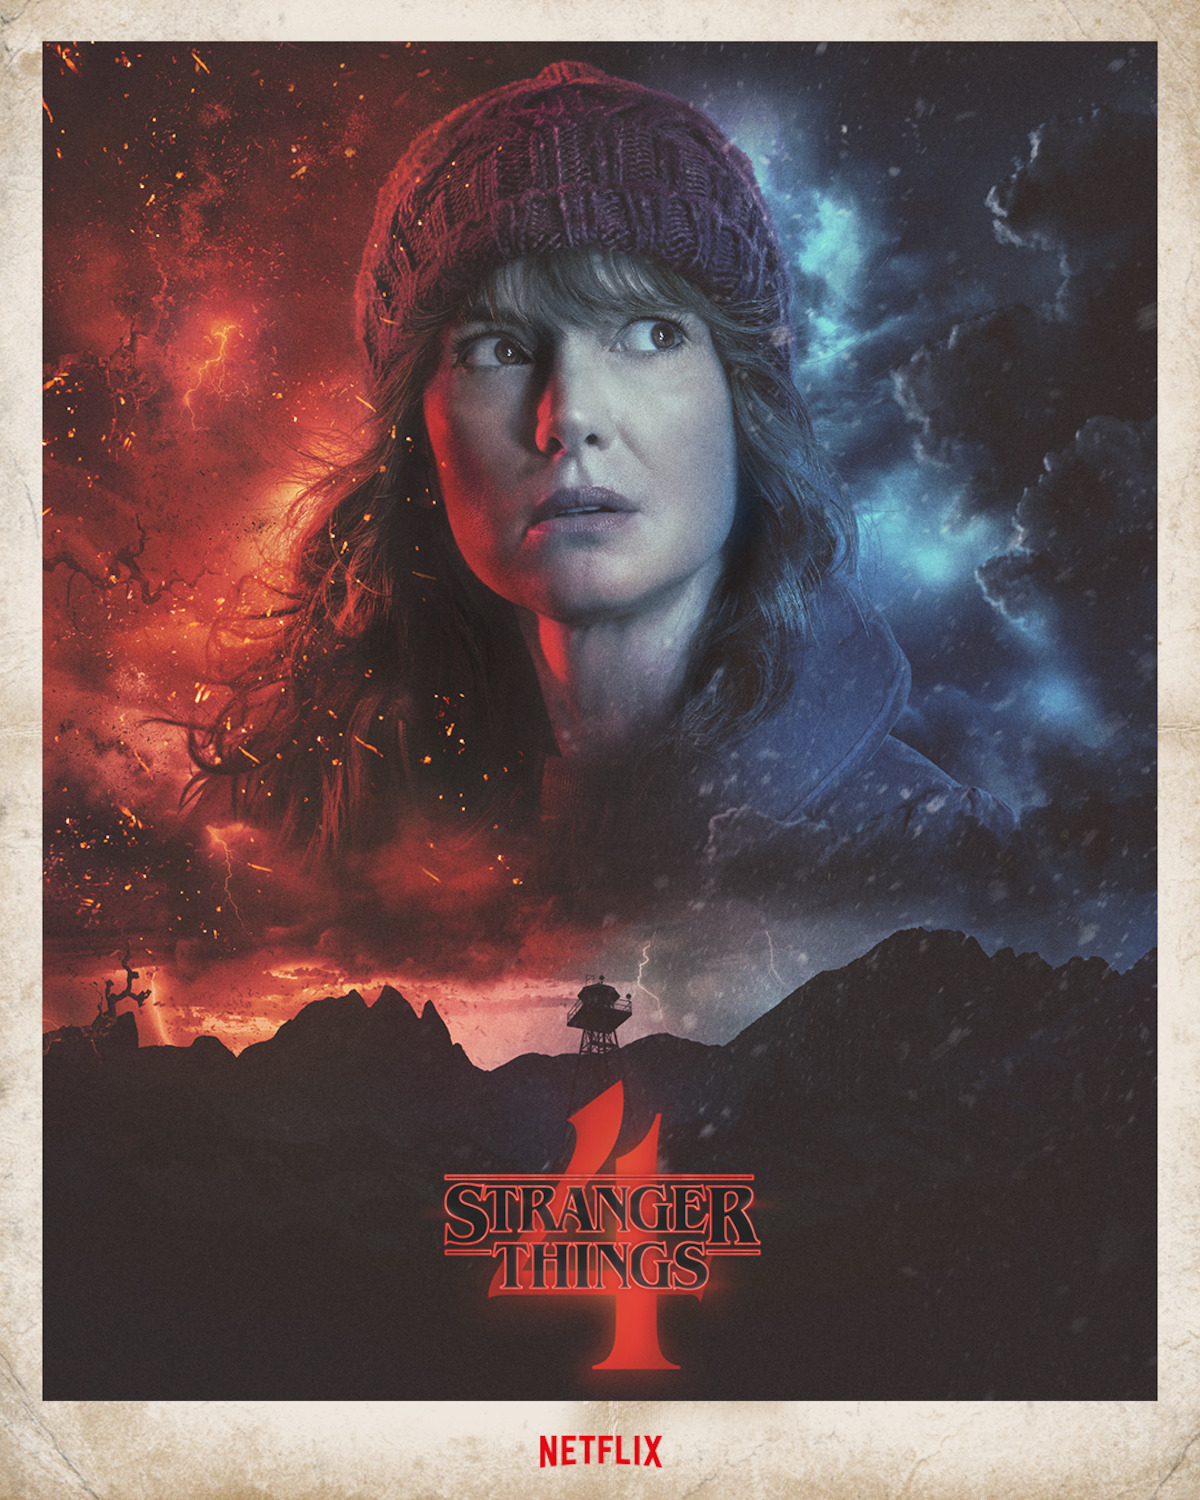 Joyce - The Byers Family Finds Trouble in California in New ‘Stranger Things 4’ Posters